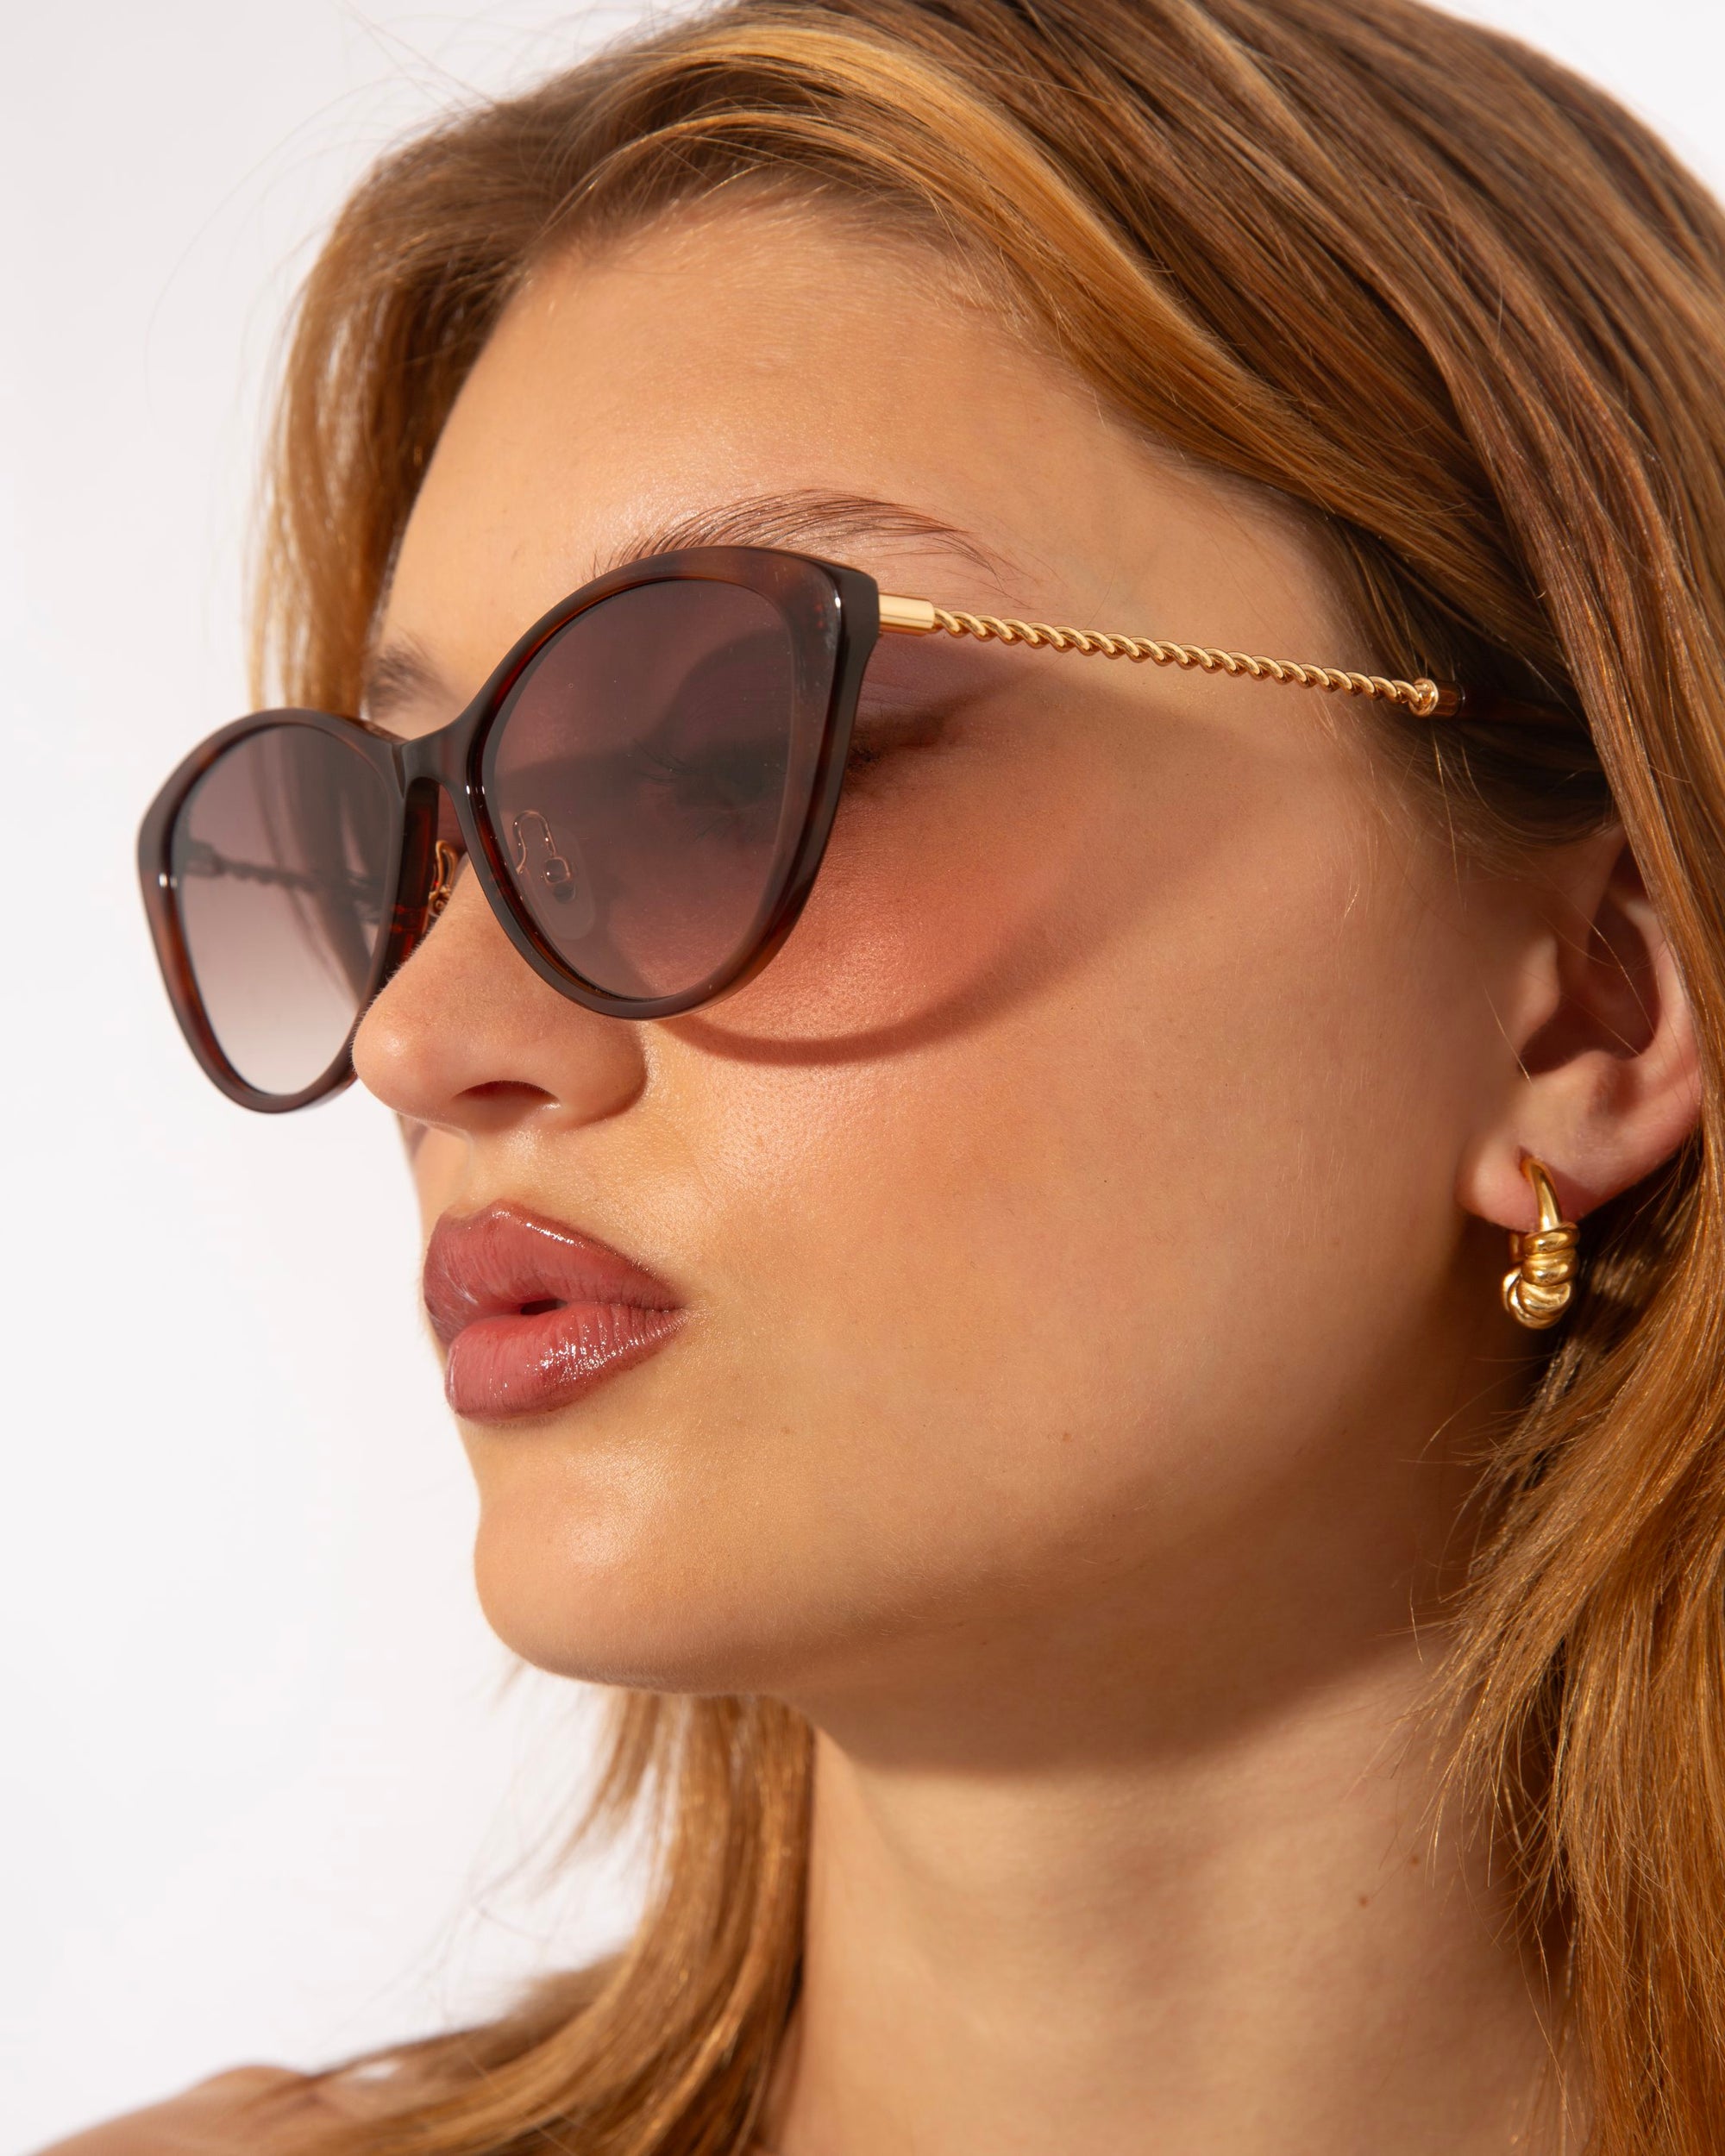 A close-up of a person wearing large, dark, cat-eye For Art's Sake® Perla II sunglasses with a gold frame and jade-stone nose pads. They have light brown hair and are also wearing a small 18-karat gold hoop earring in one ear. The background is plain white.